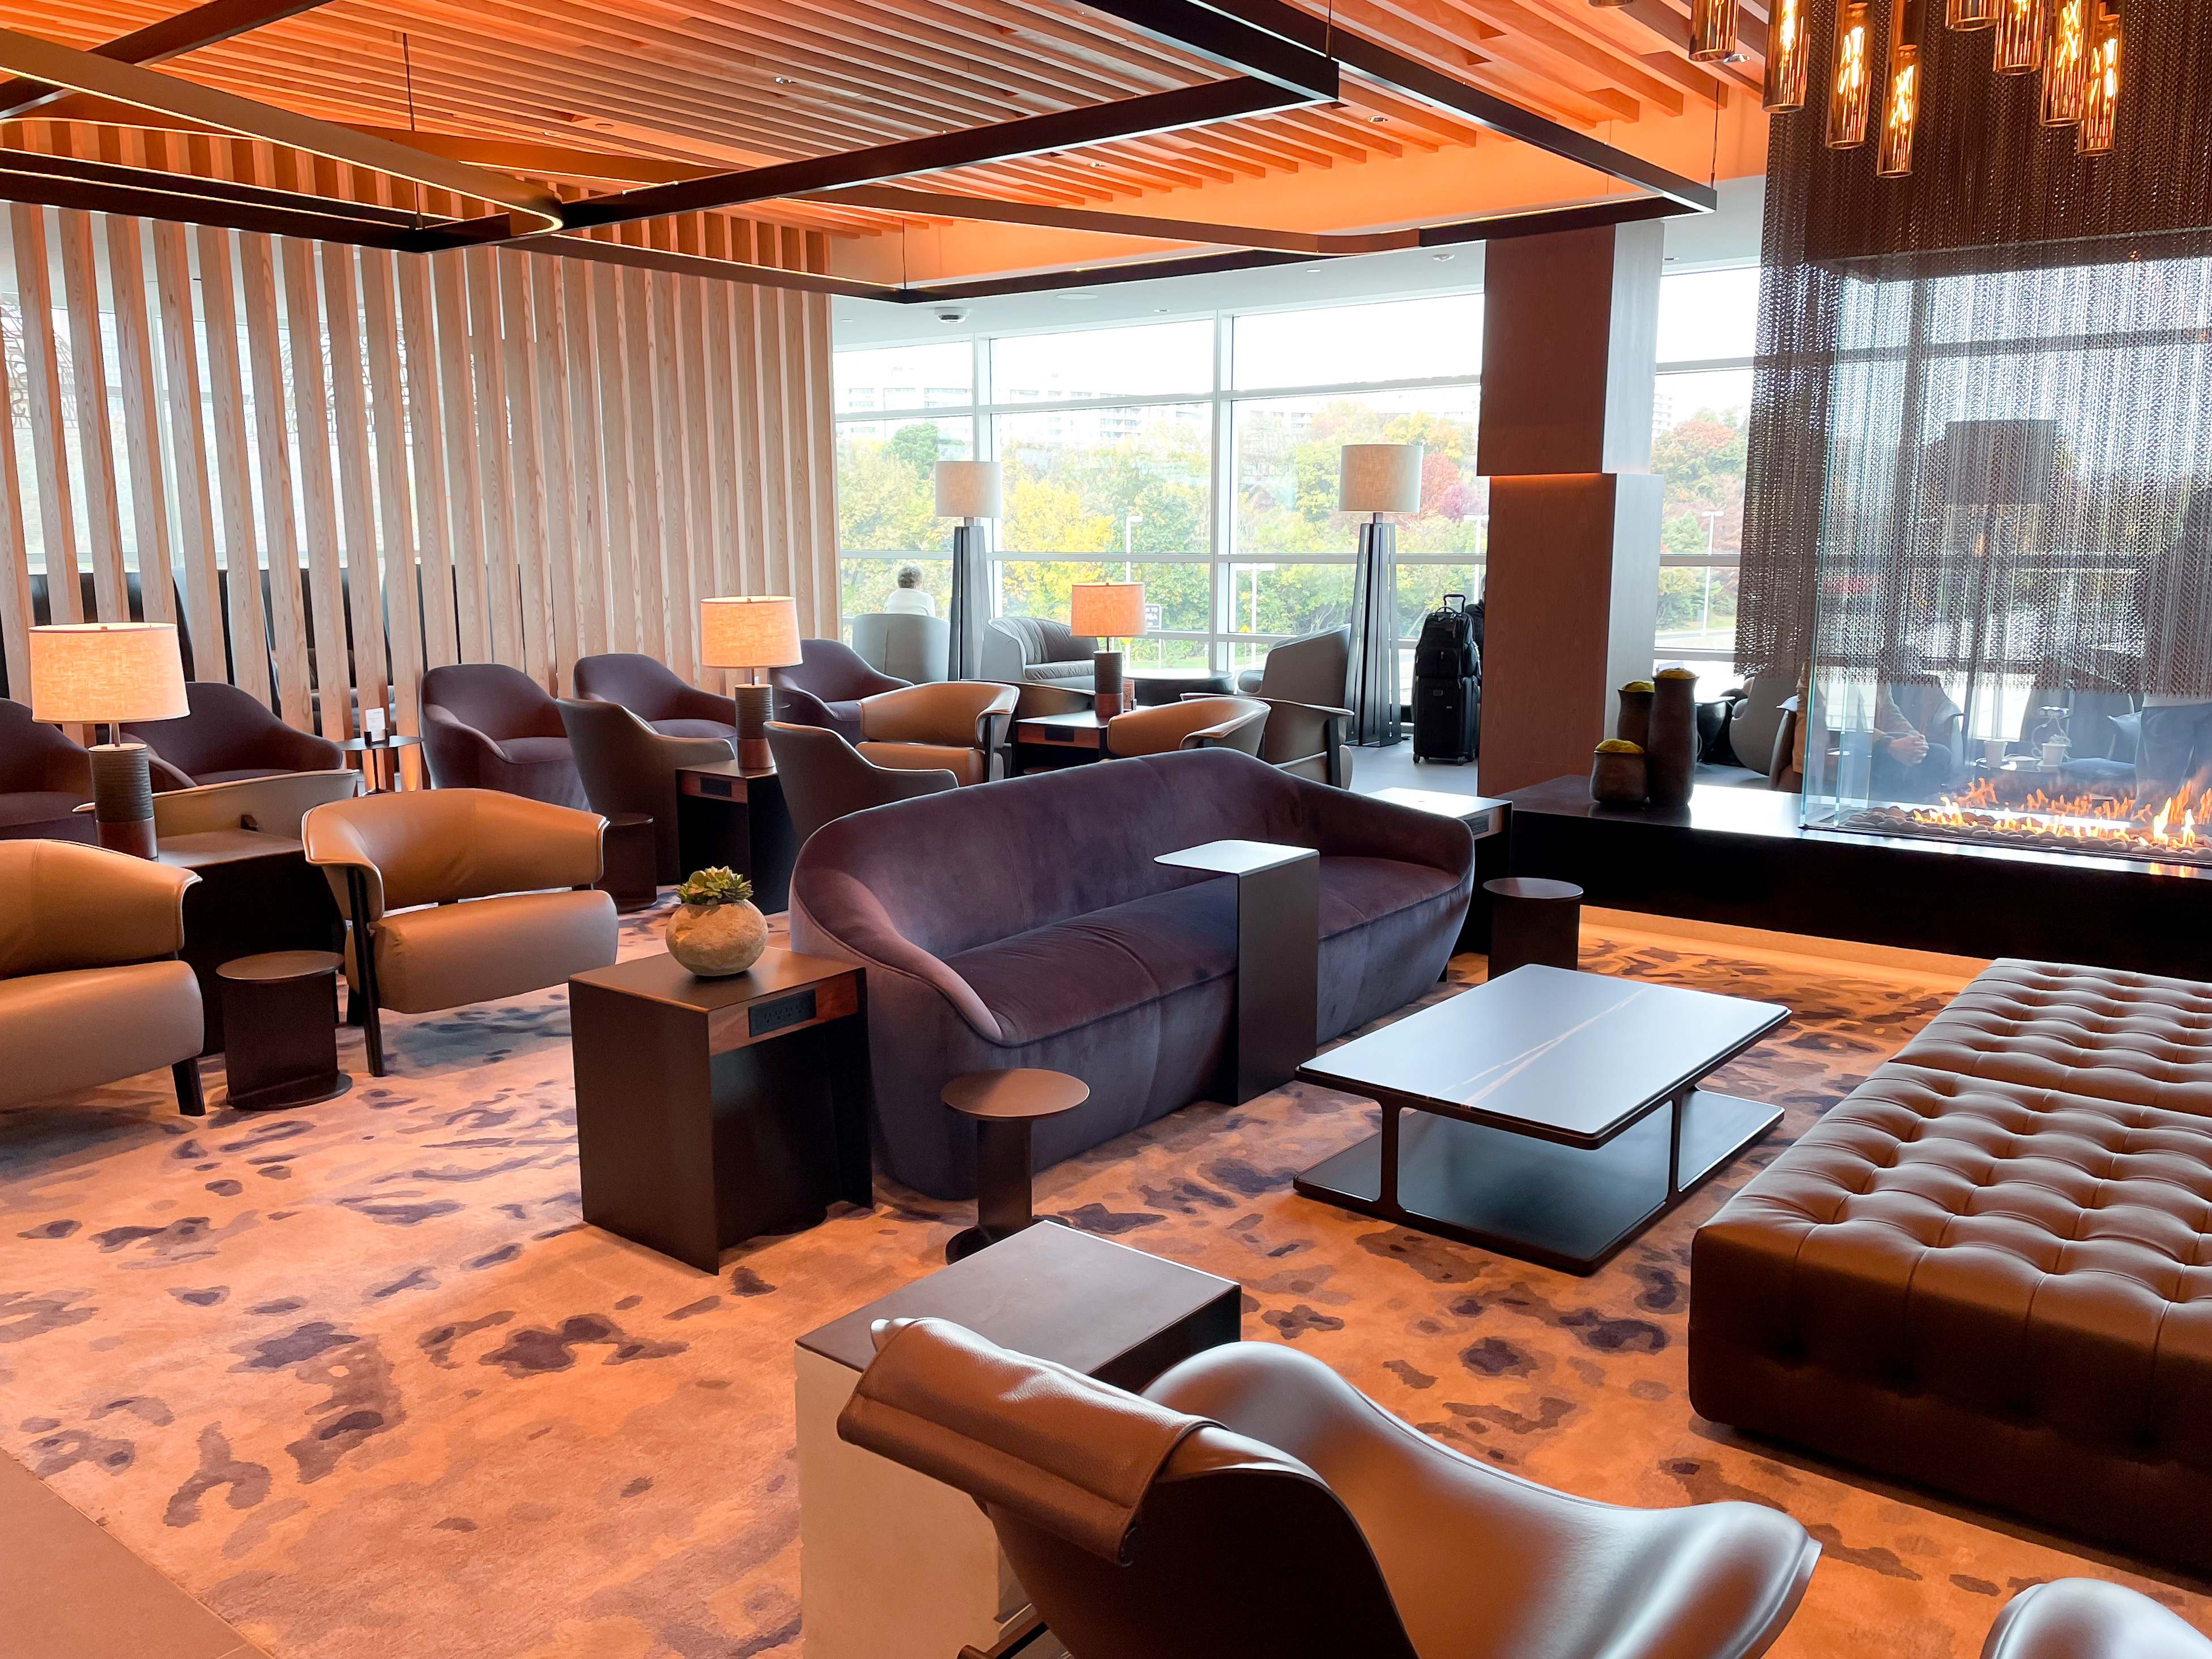 The main seating area on the other side of the new Admirals Club at Washington National Airport.